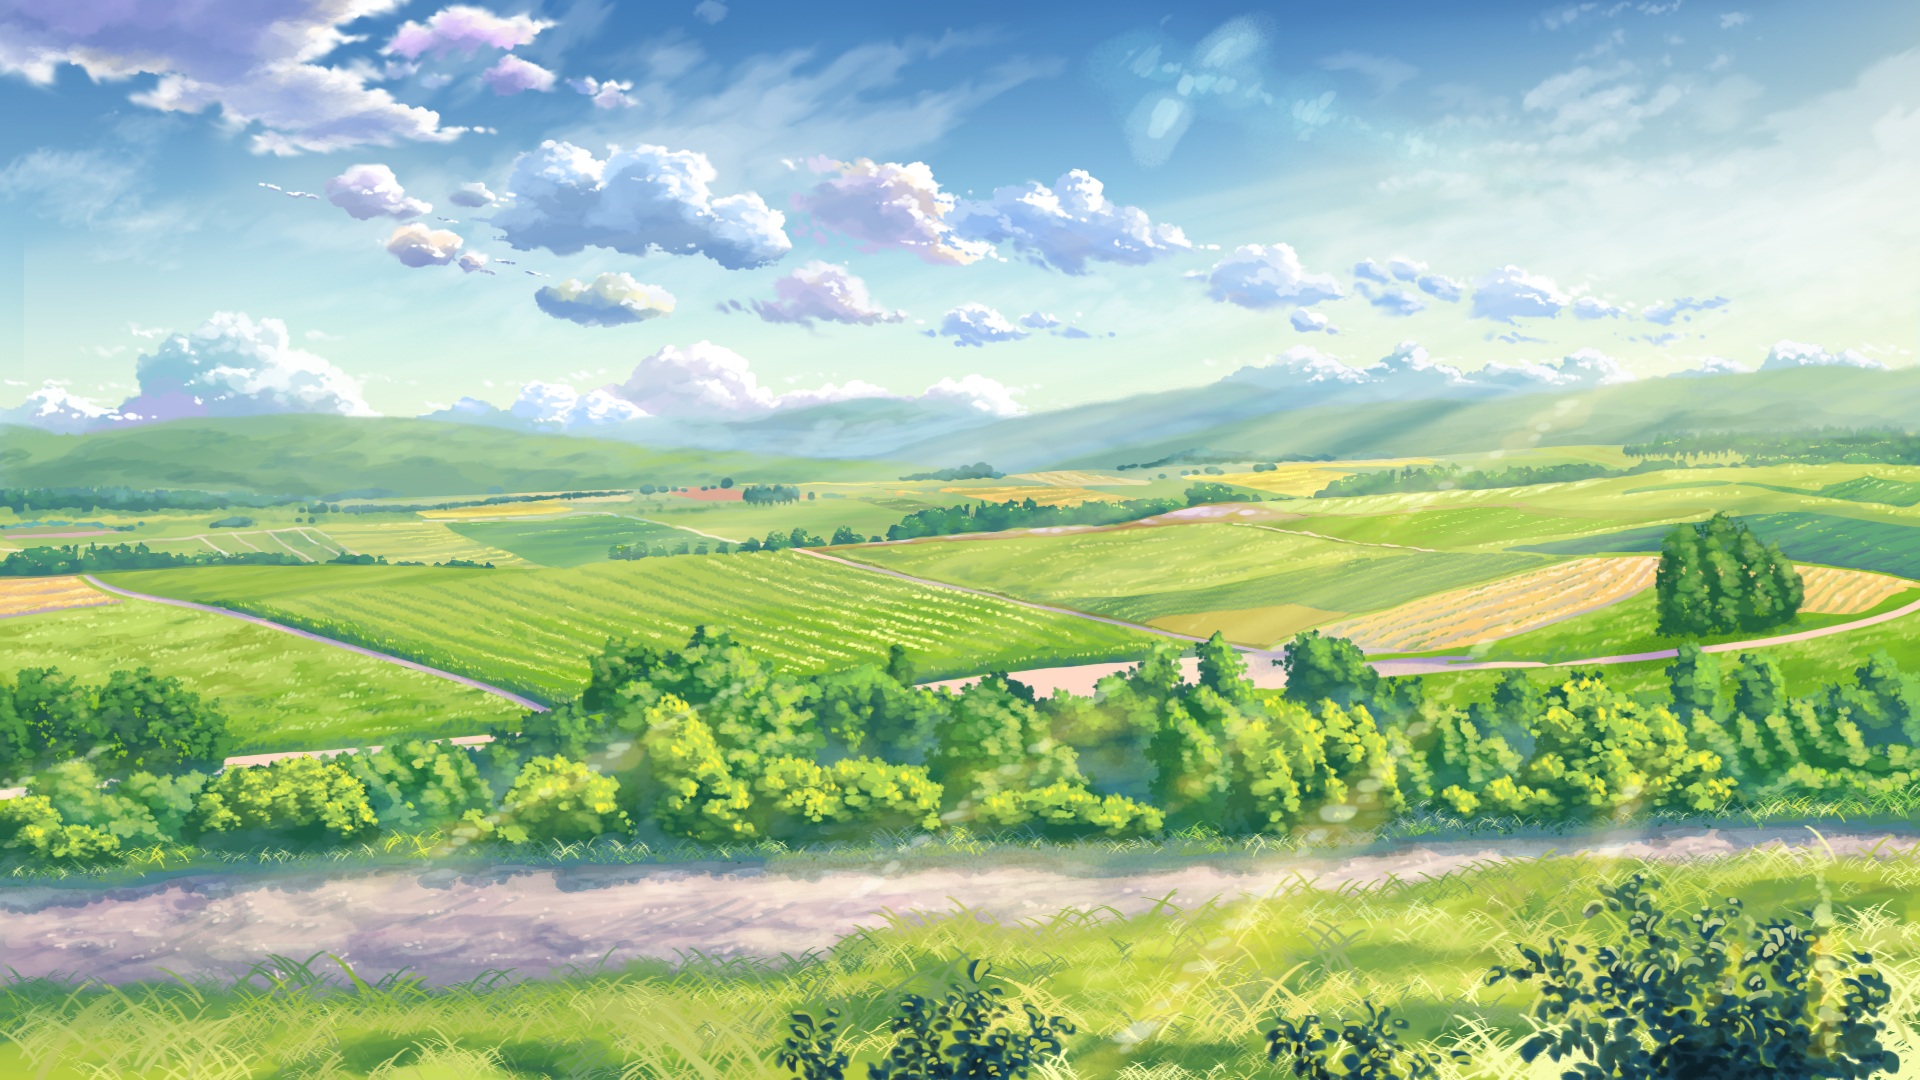 Battle ground  Anime scenery, Anime background, Hd anime wallpapers